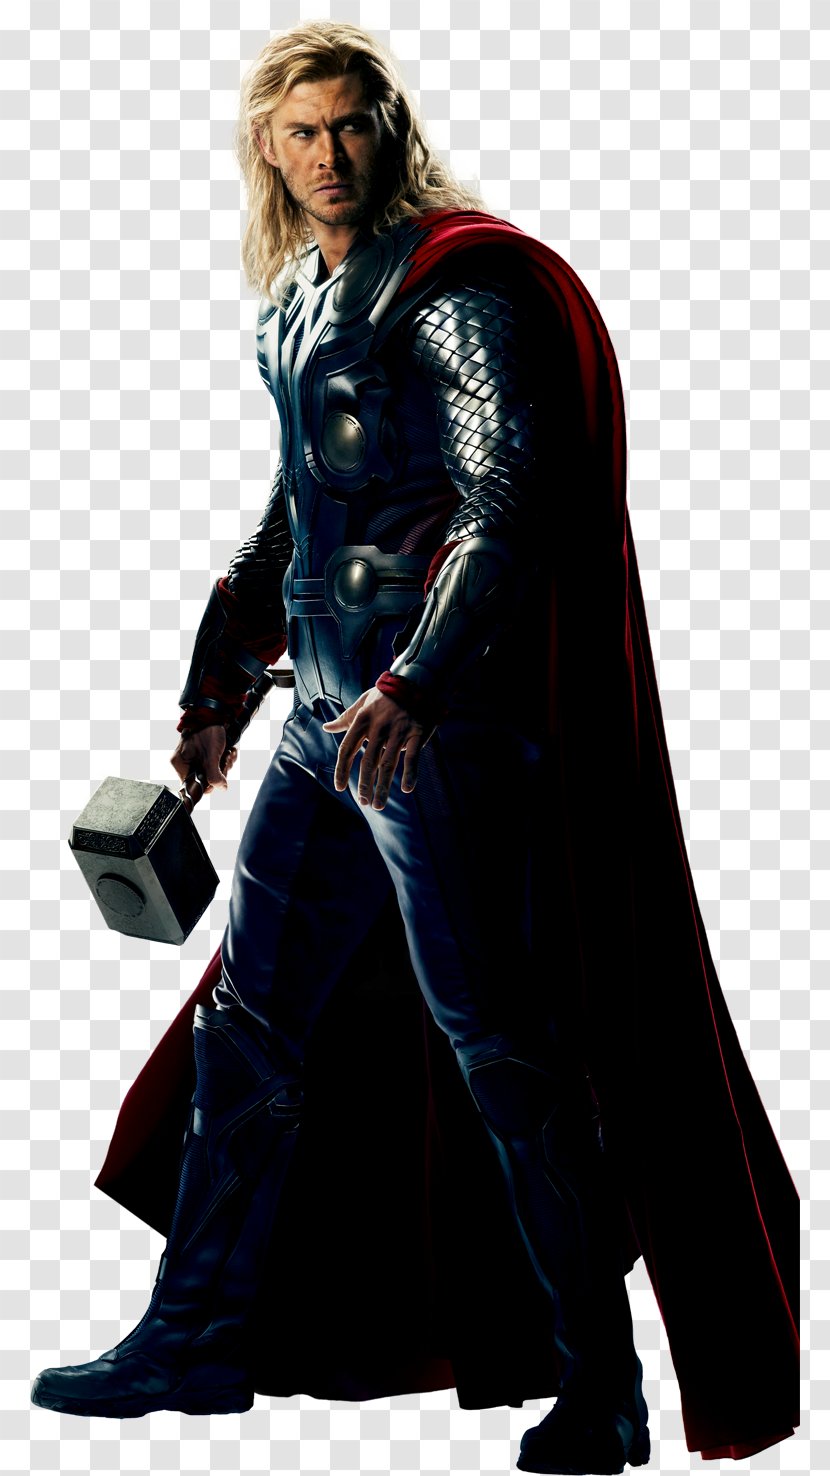 Chris Hemsworth Thor The Avengers Marvel Cinematic Universe - Latex Clothing Transparent PNG